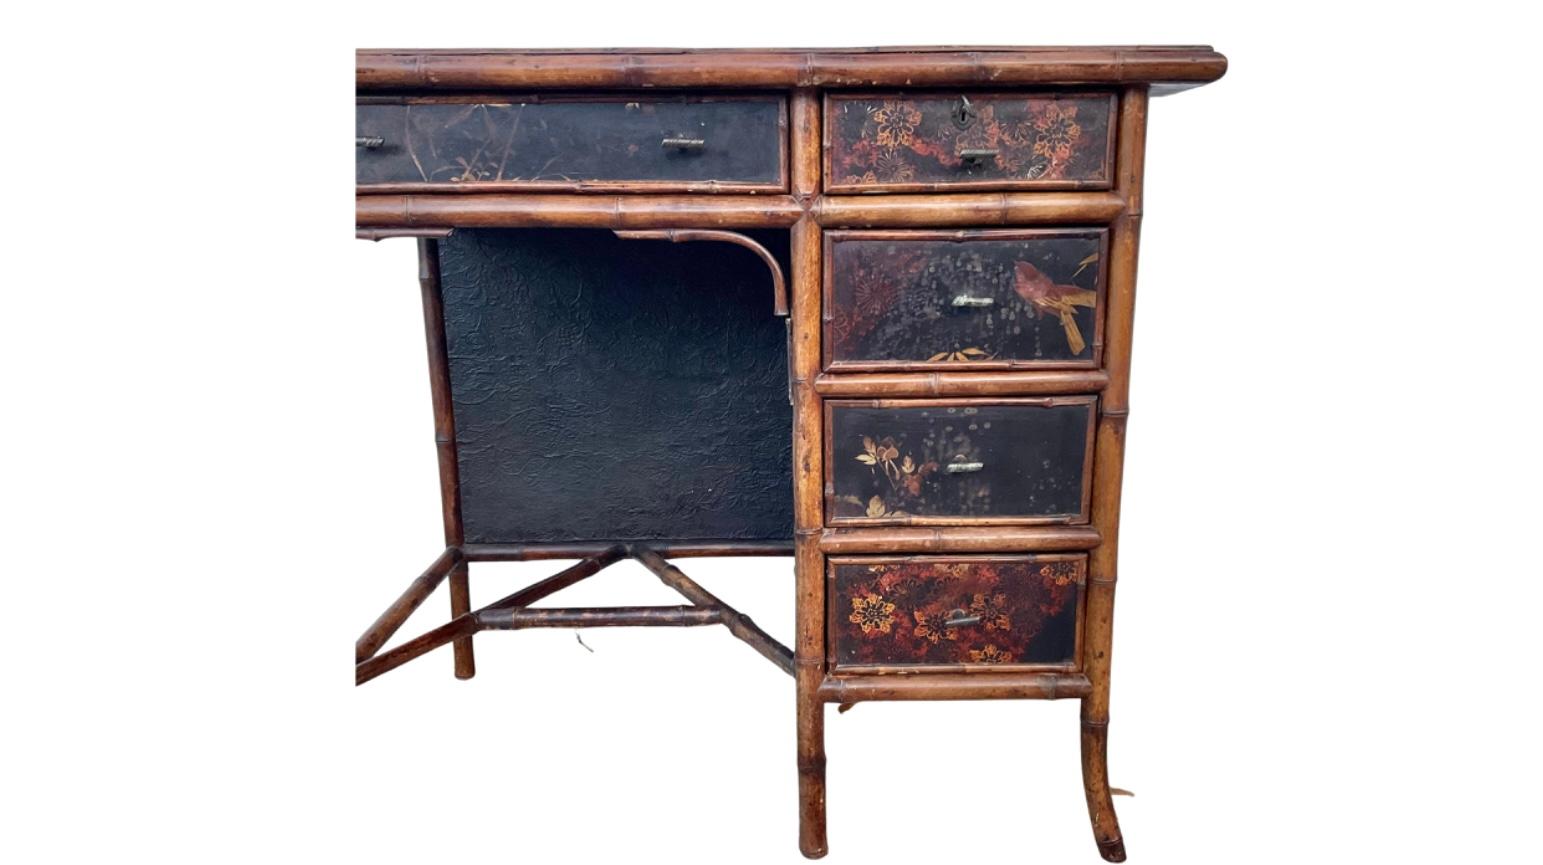 19th century lacquered bamboo writing desk with tooled leather writing surface decorated in the Chinoiserie style. Decorated in the birds and floral fashion of the style. Features five pull-out drawers with bamboo shape handles. 